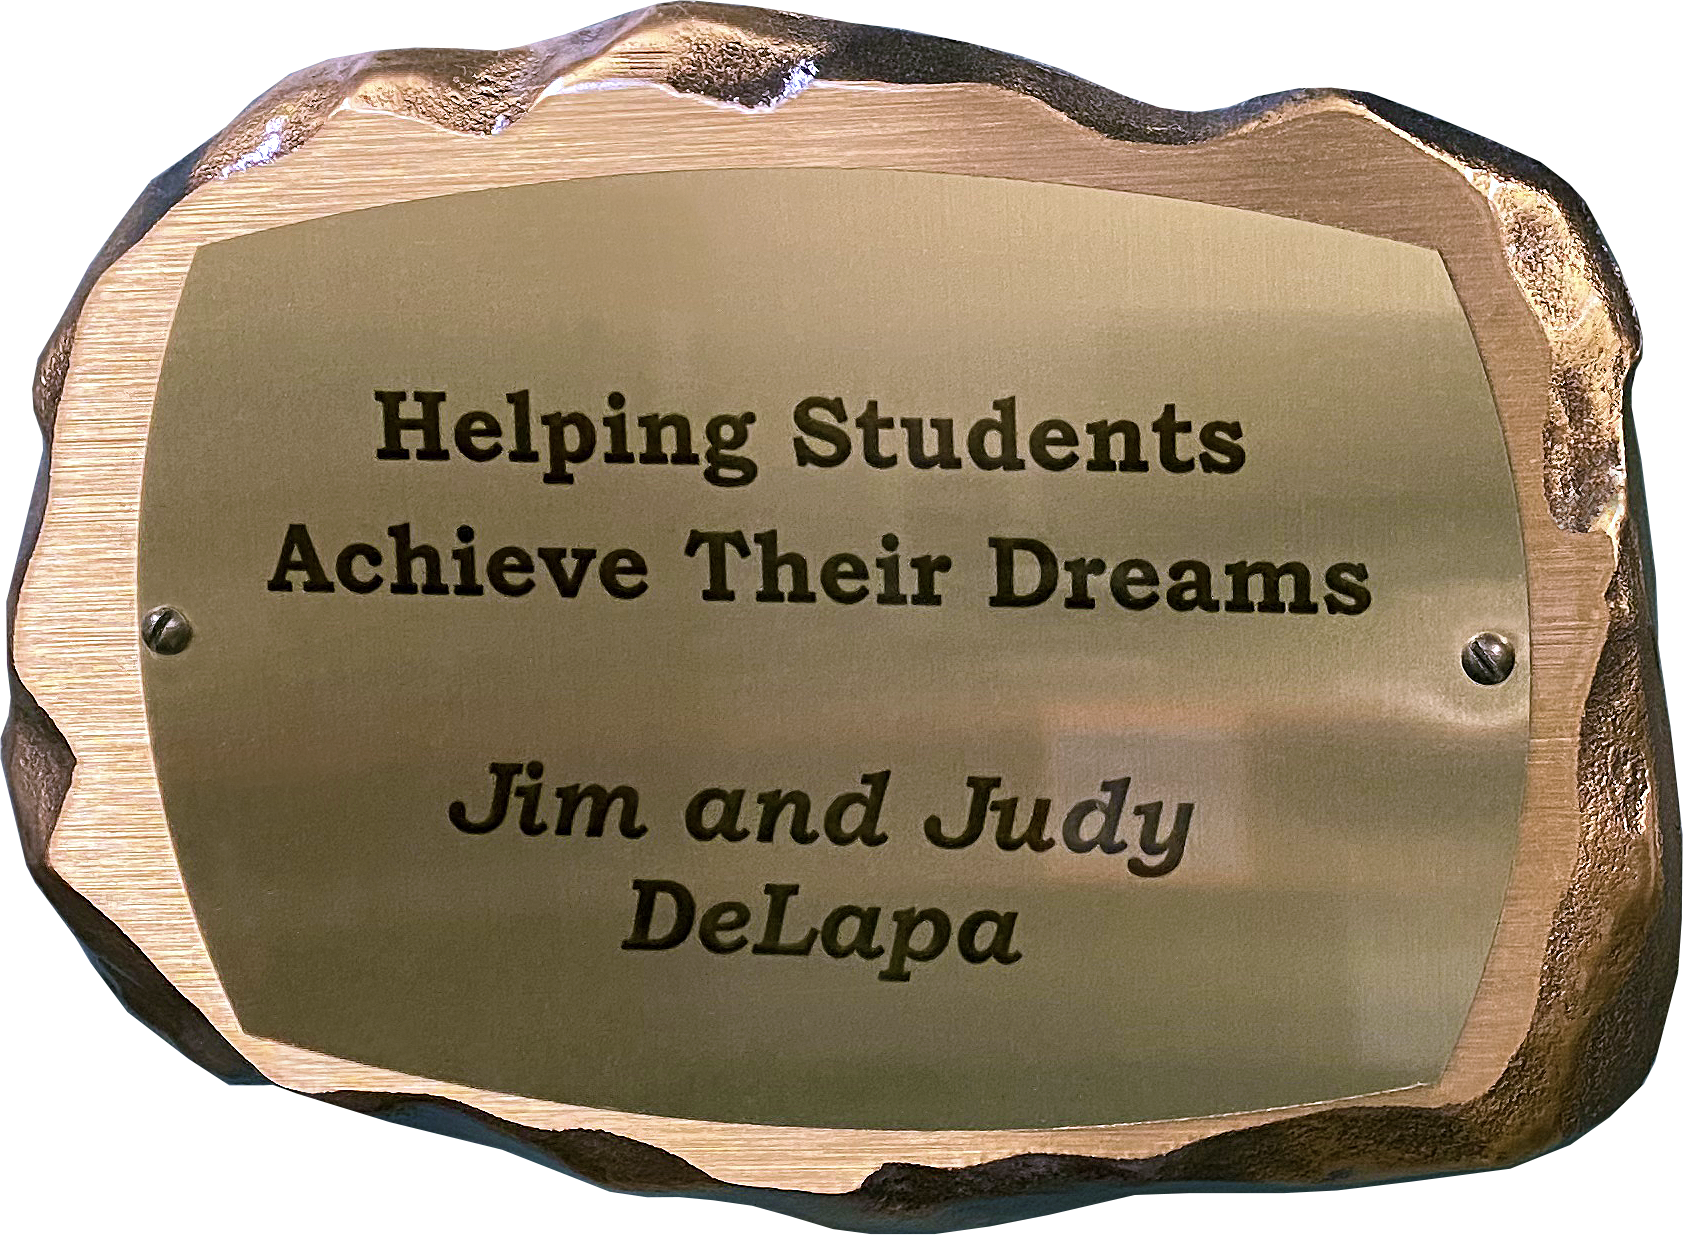 Inscribed bronze plaque in the shape of a rock with text on it reading: Helping Students Achieve Their Dreams. Jim and Judy DeLapa